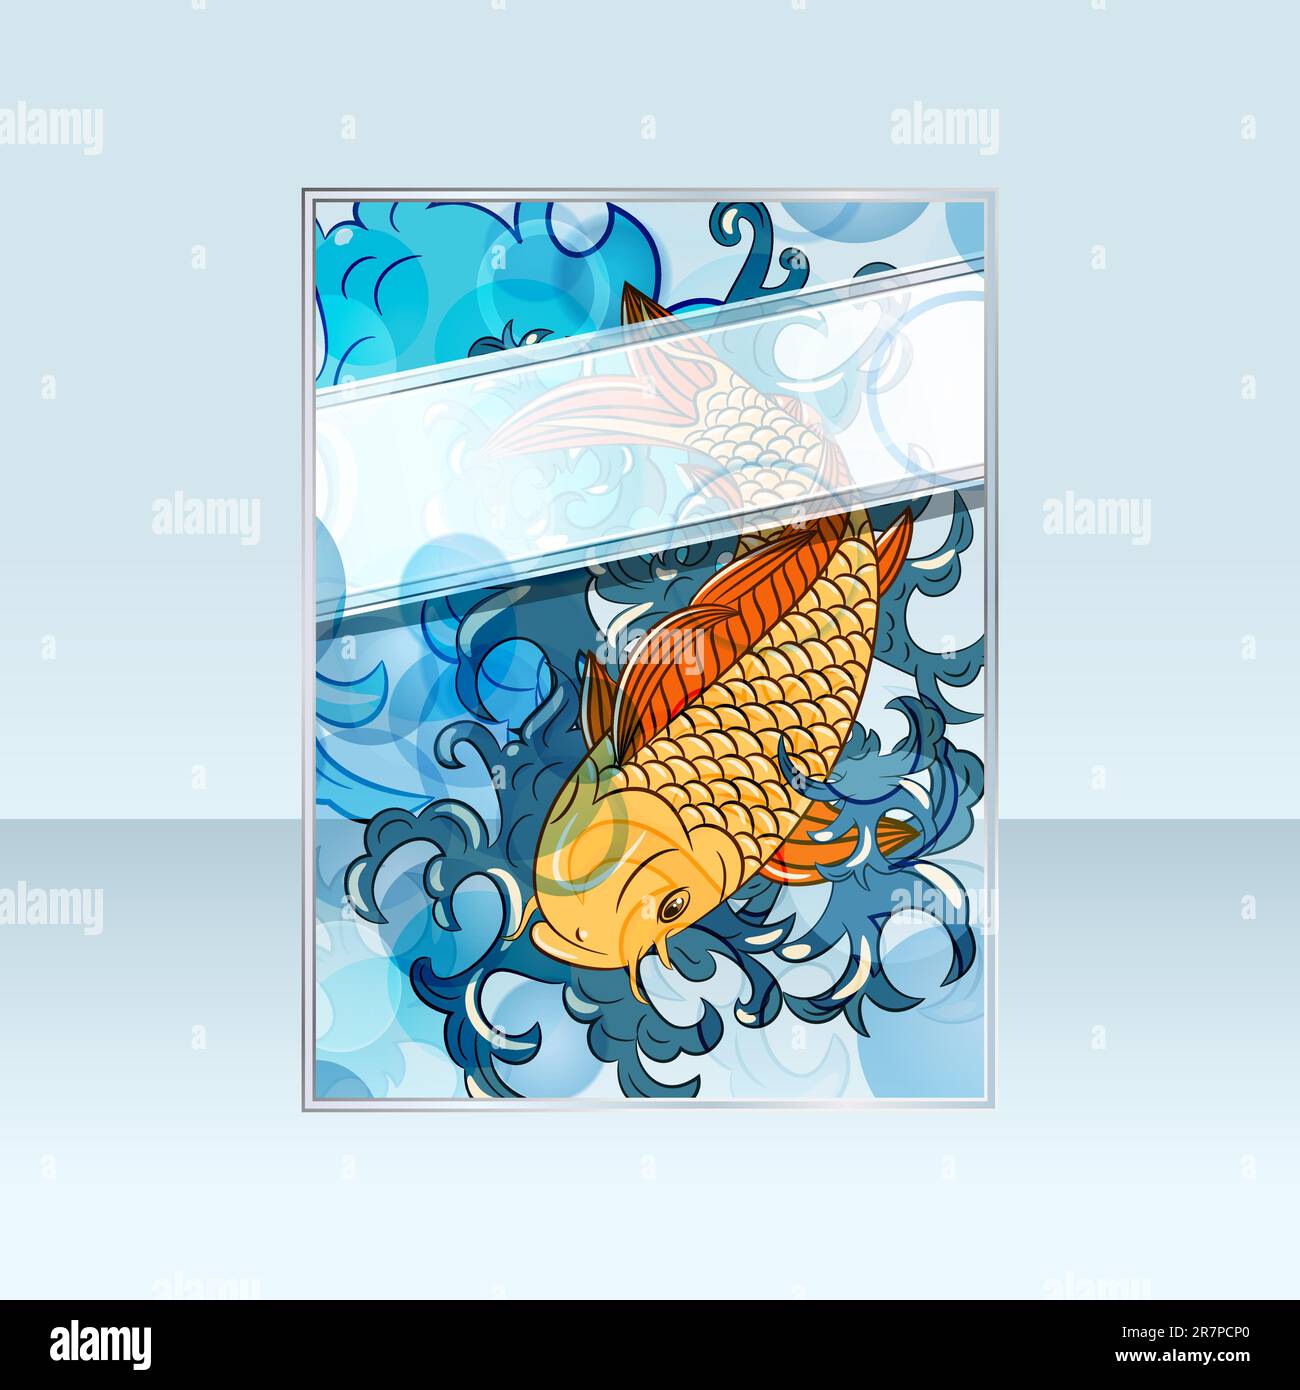 eps 10? vector banner with japanese style koi  (carp fish) Stock Vector